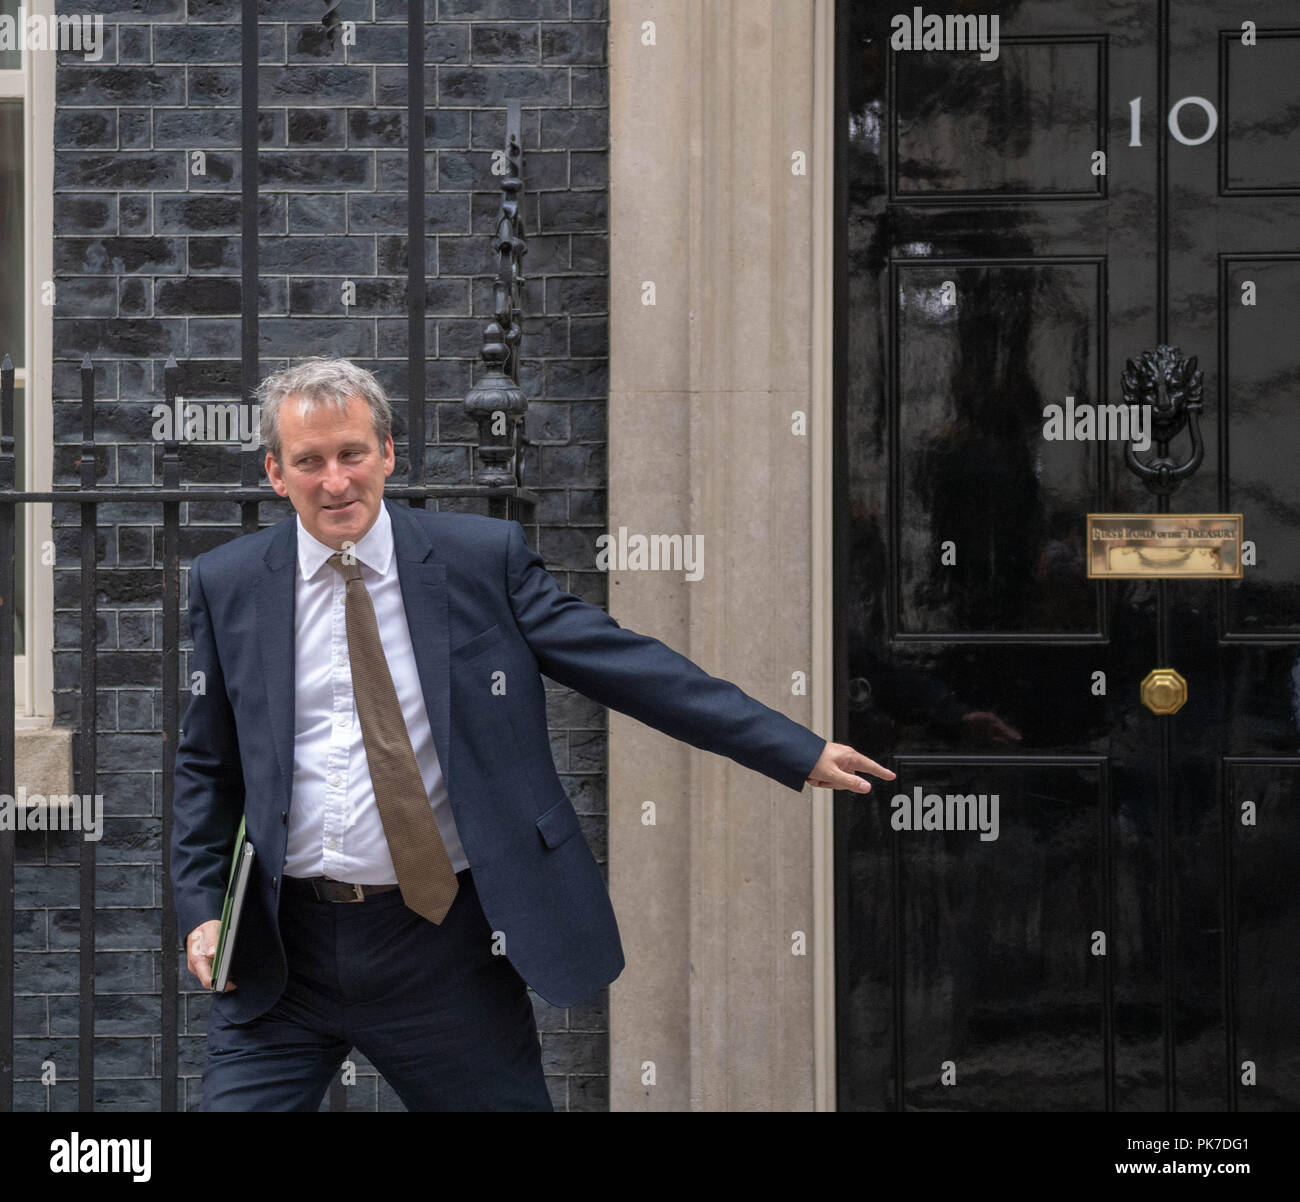 London 11th September 2018,Damian Hinds PC MP, Education Secretary , leaves Cabinet meeting at 10 Downing Street, London Credit Ian Davidson/Alamy Live News Stock Photo